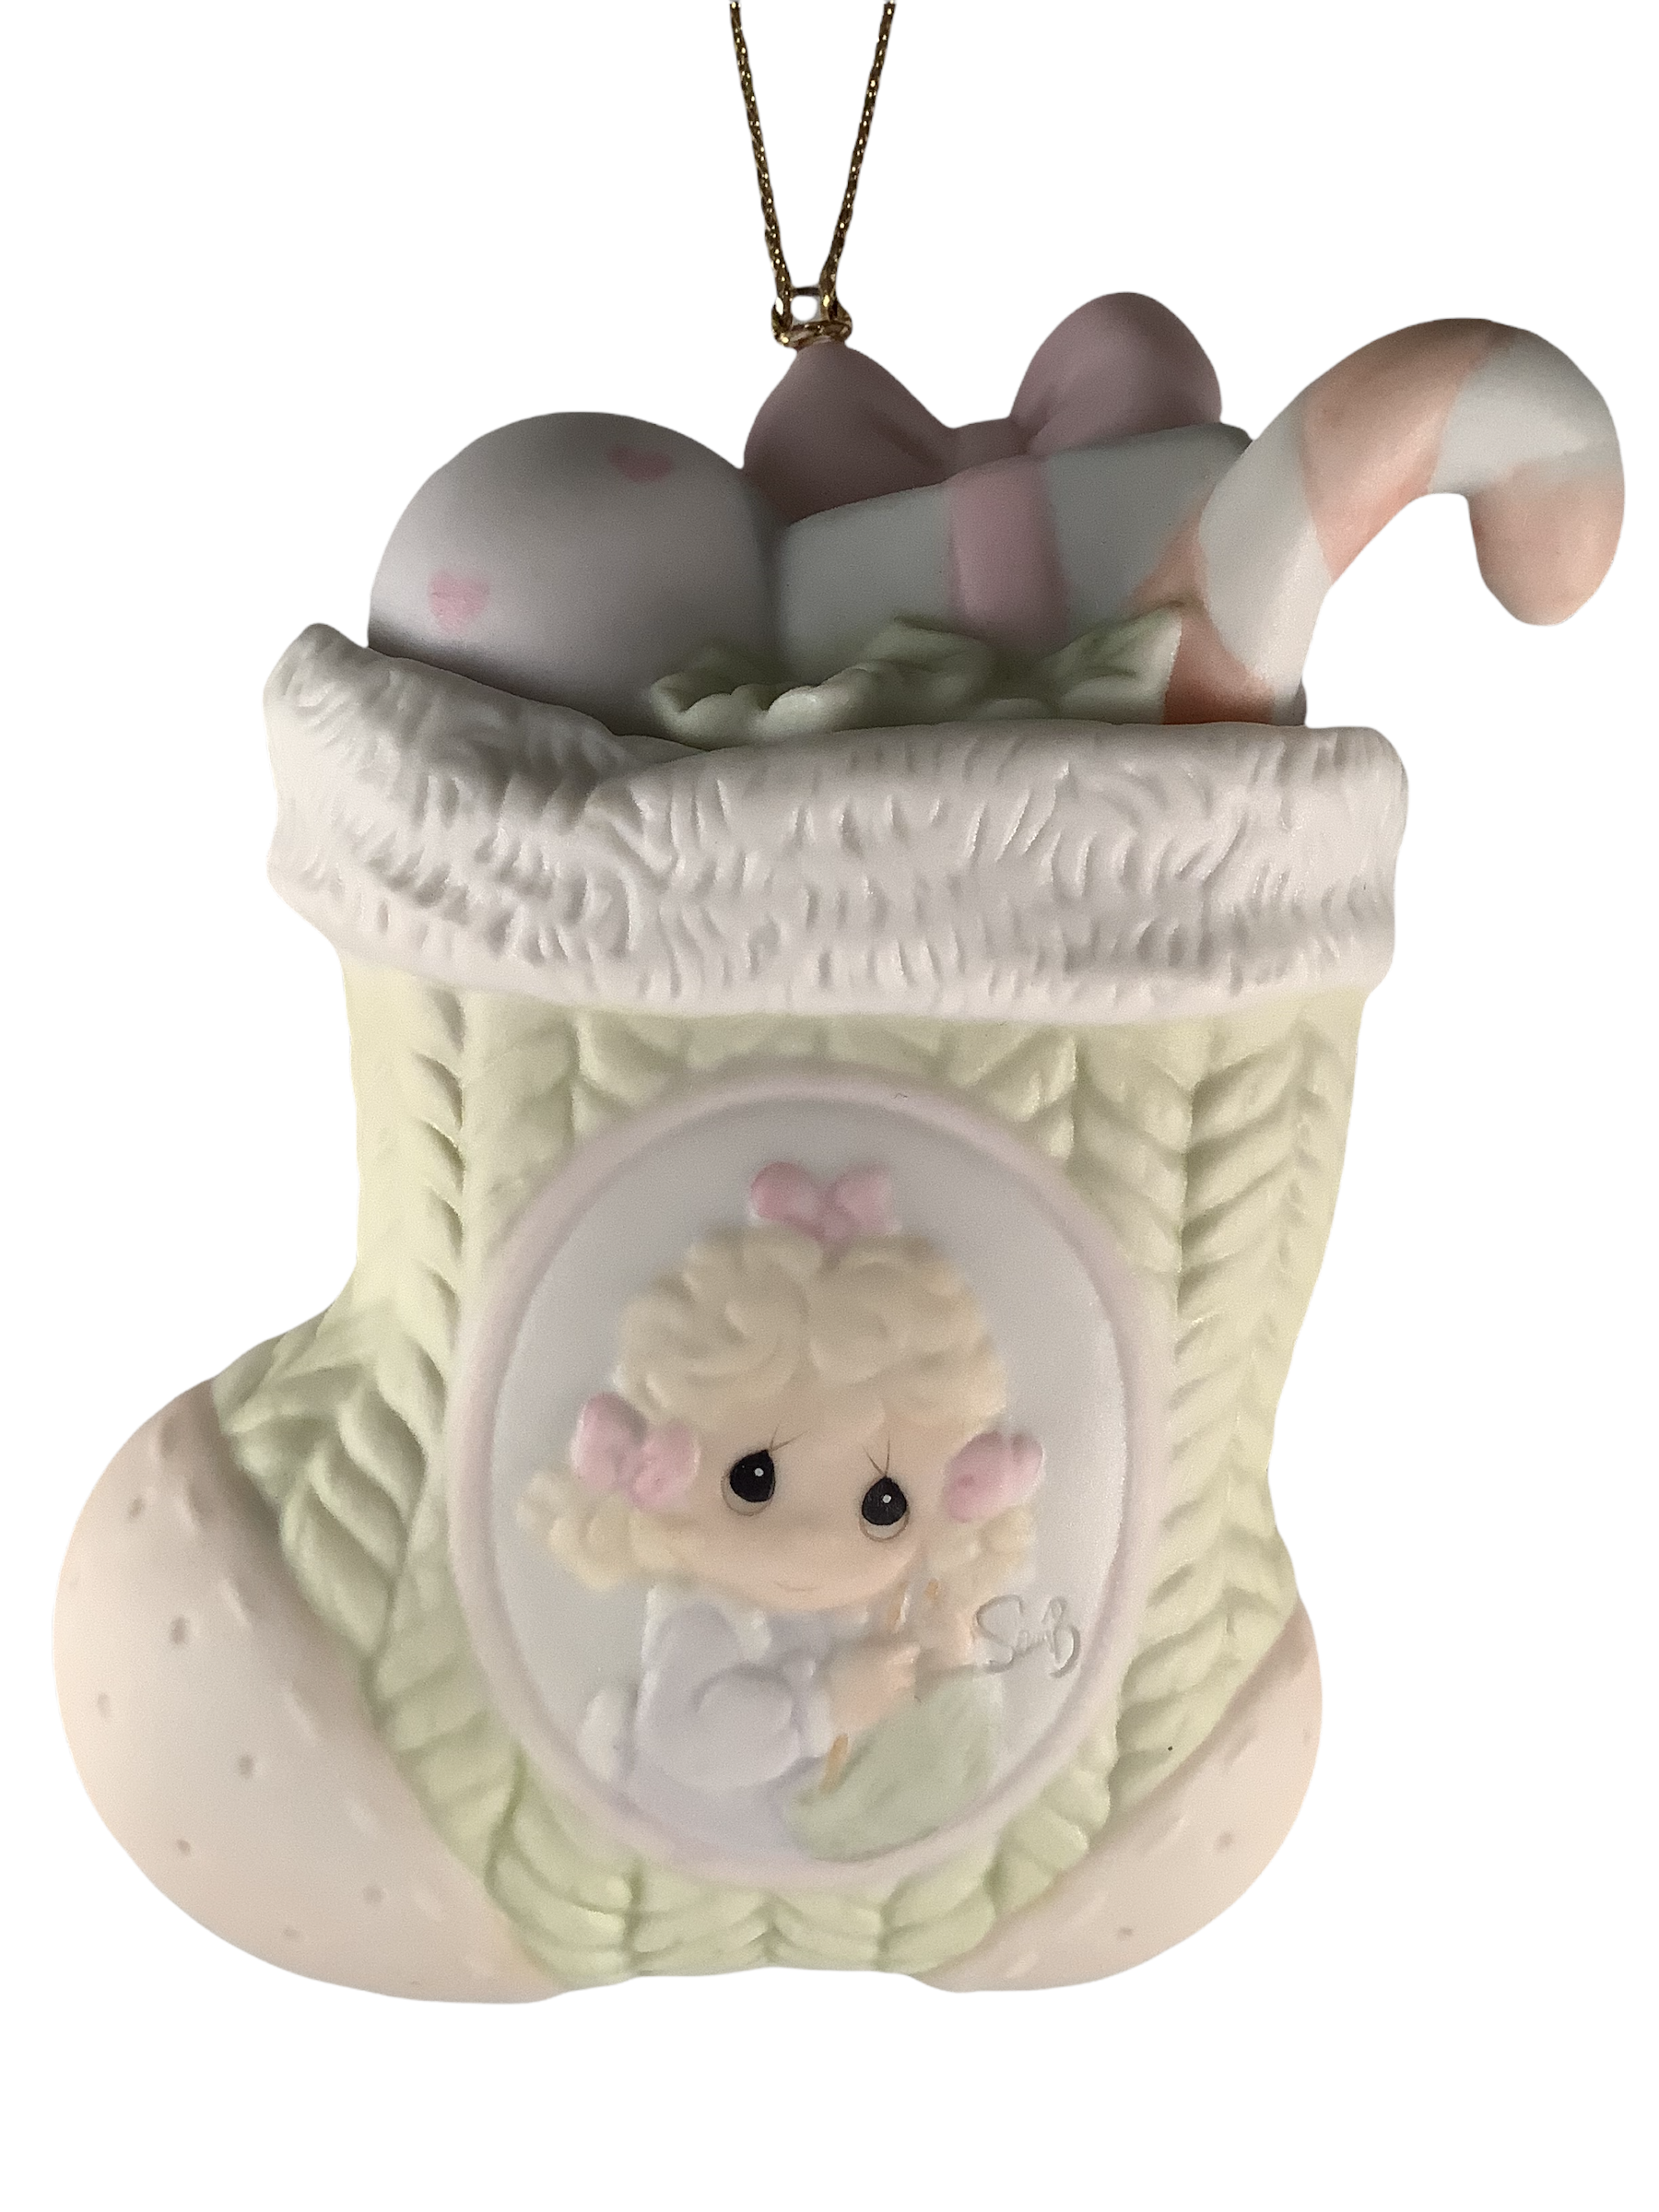 My Love Will Keep You Warm - Precious Moment Ornament